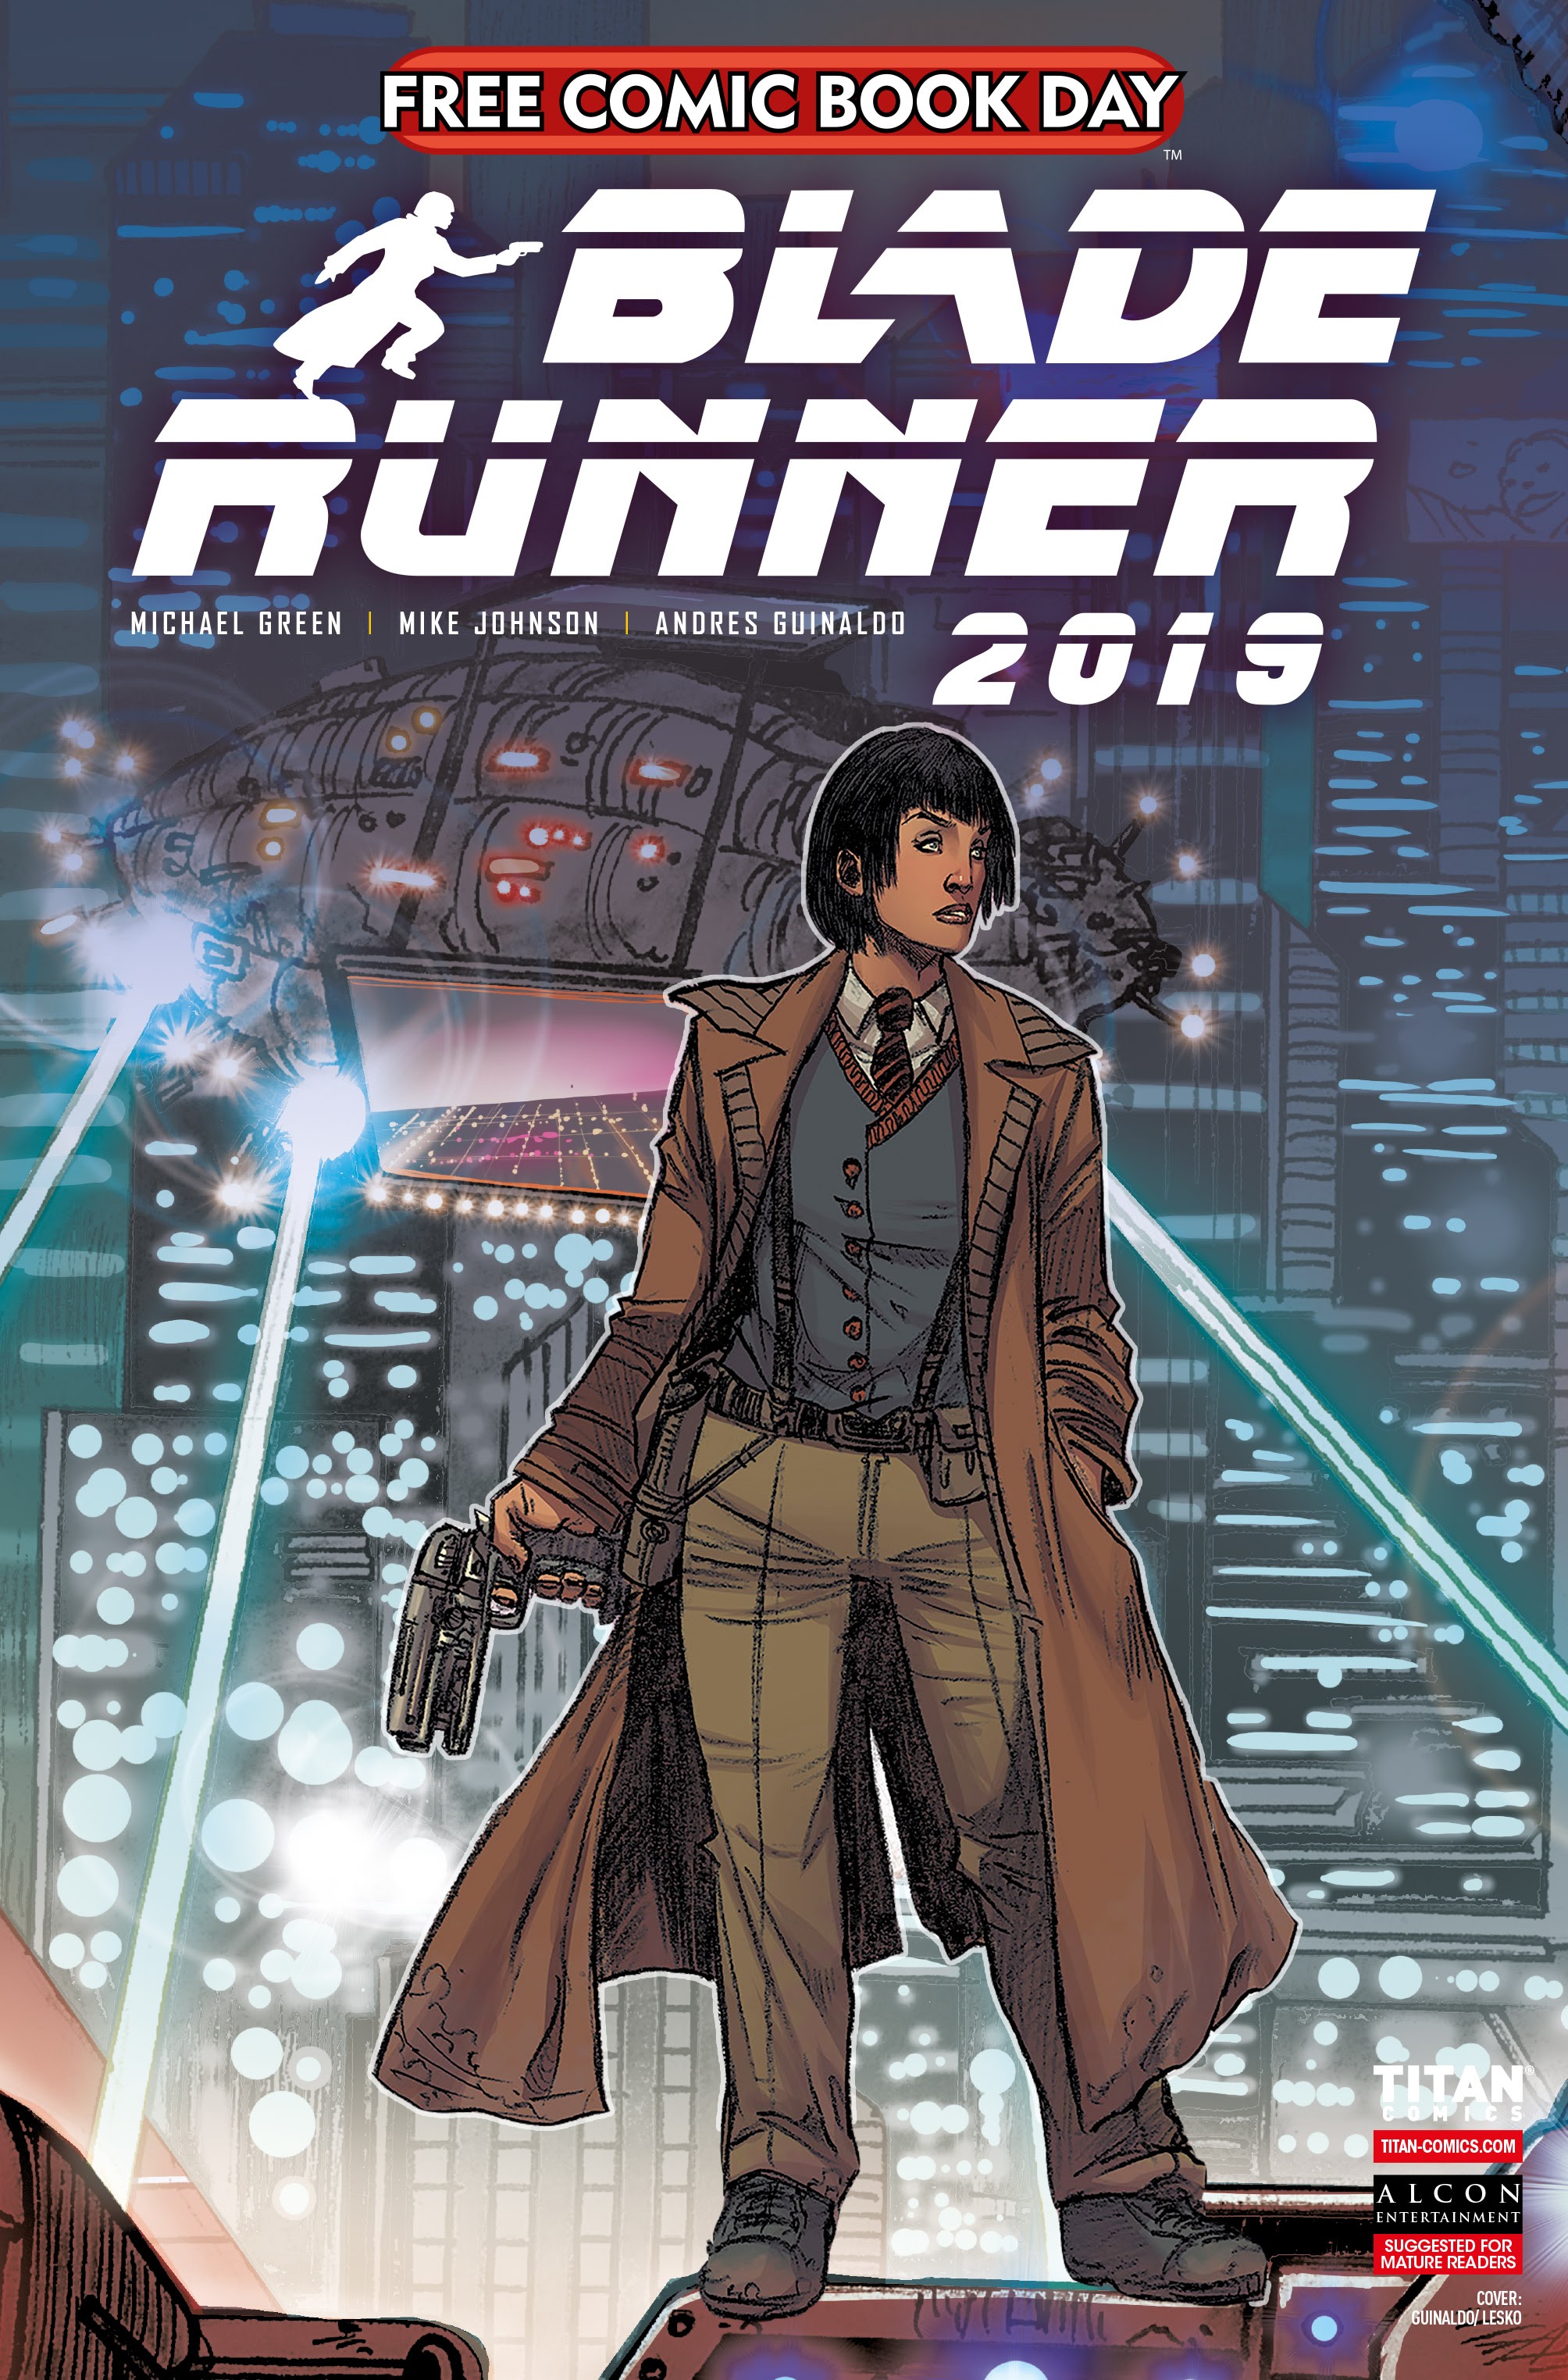 Read online Free Comic Book Day 2020 comic -  Issue # Blade Runner 2019 - 1